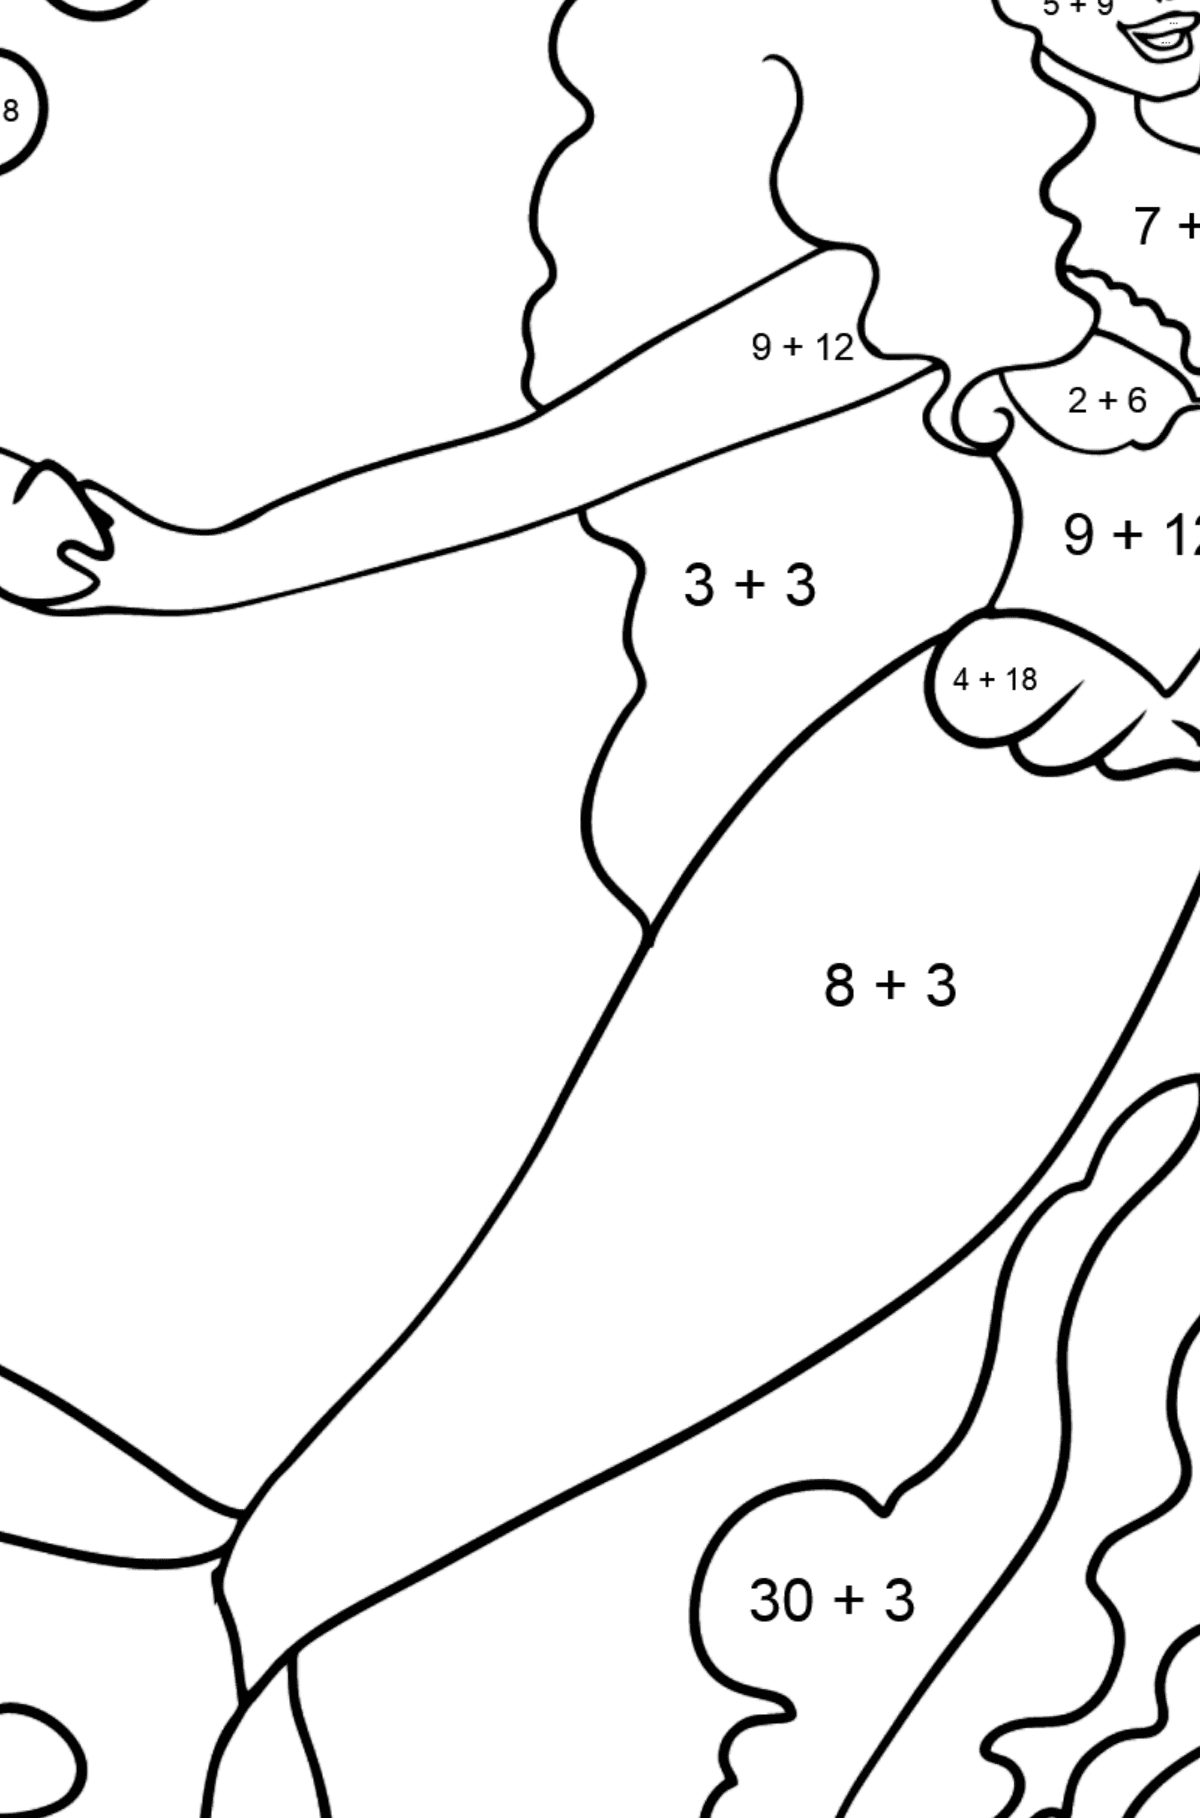 Coloring Page Mermaid and two crabs - Math Coloring - Addition for Kids